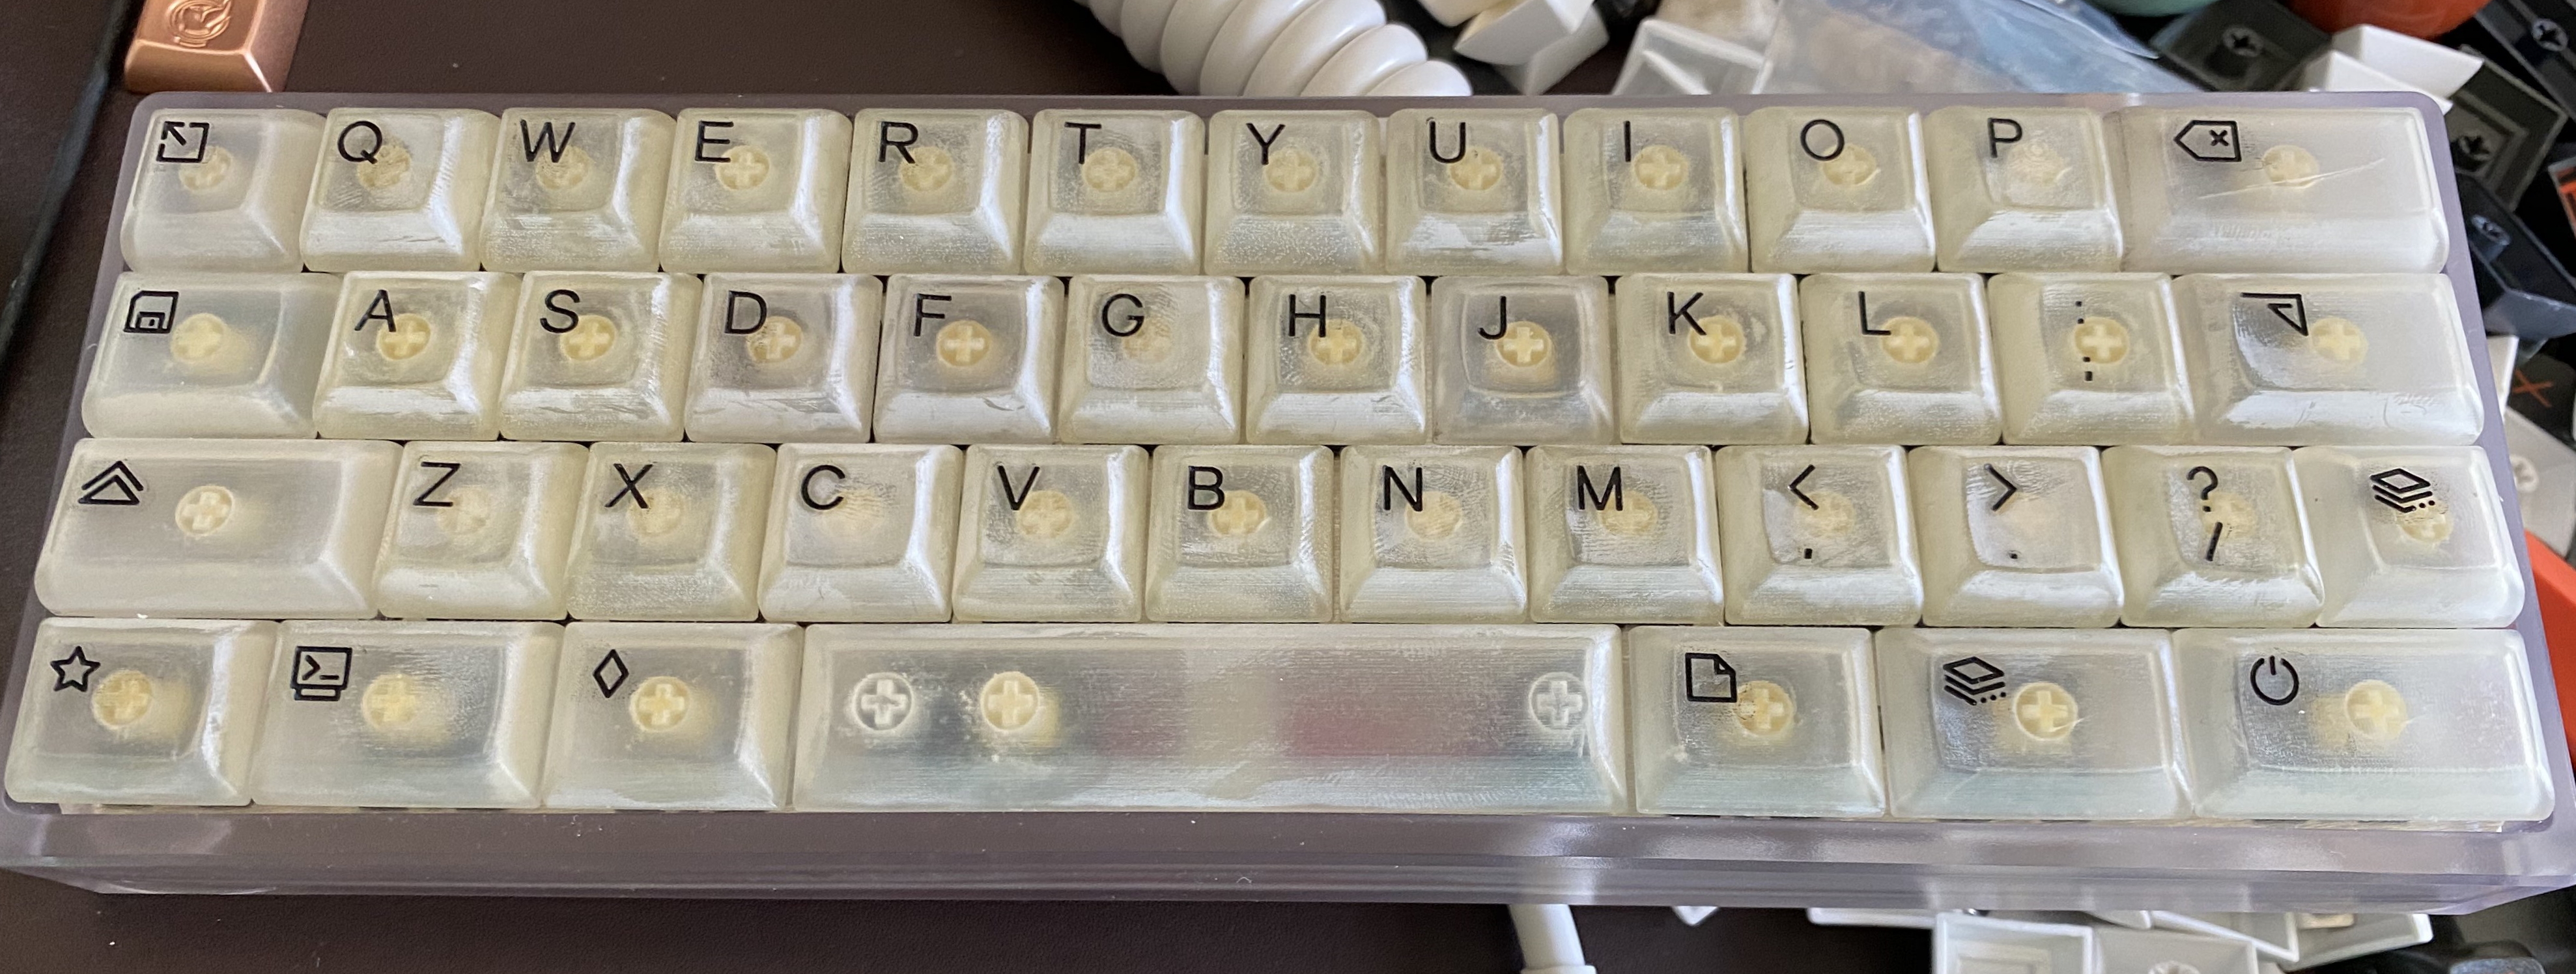 Prototype HuB keycaps with laser-etched and infilled legends as well as an early version of the 4.25u spacebar